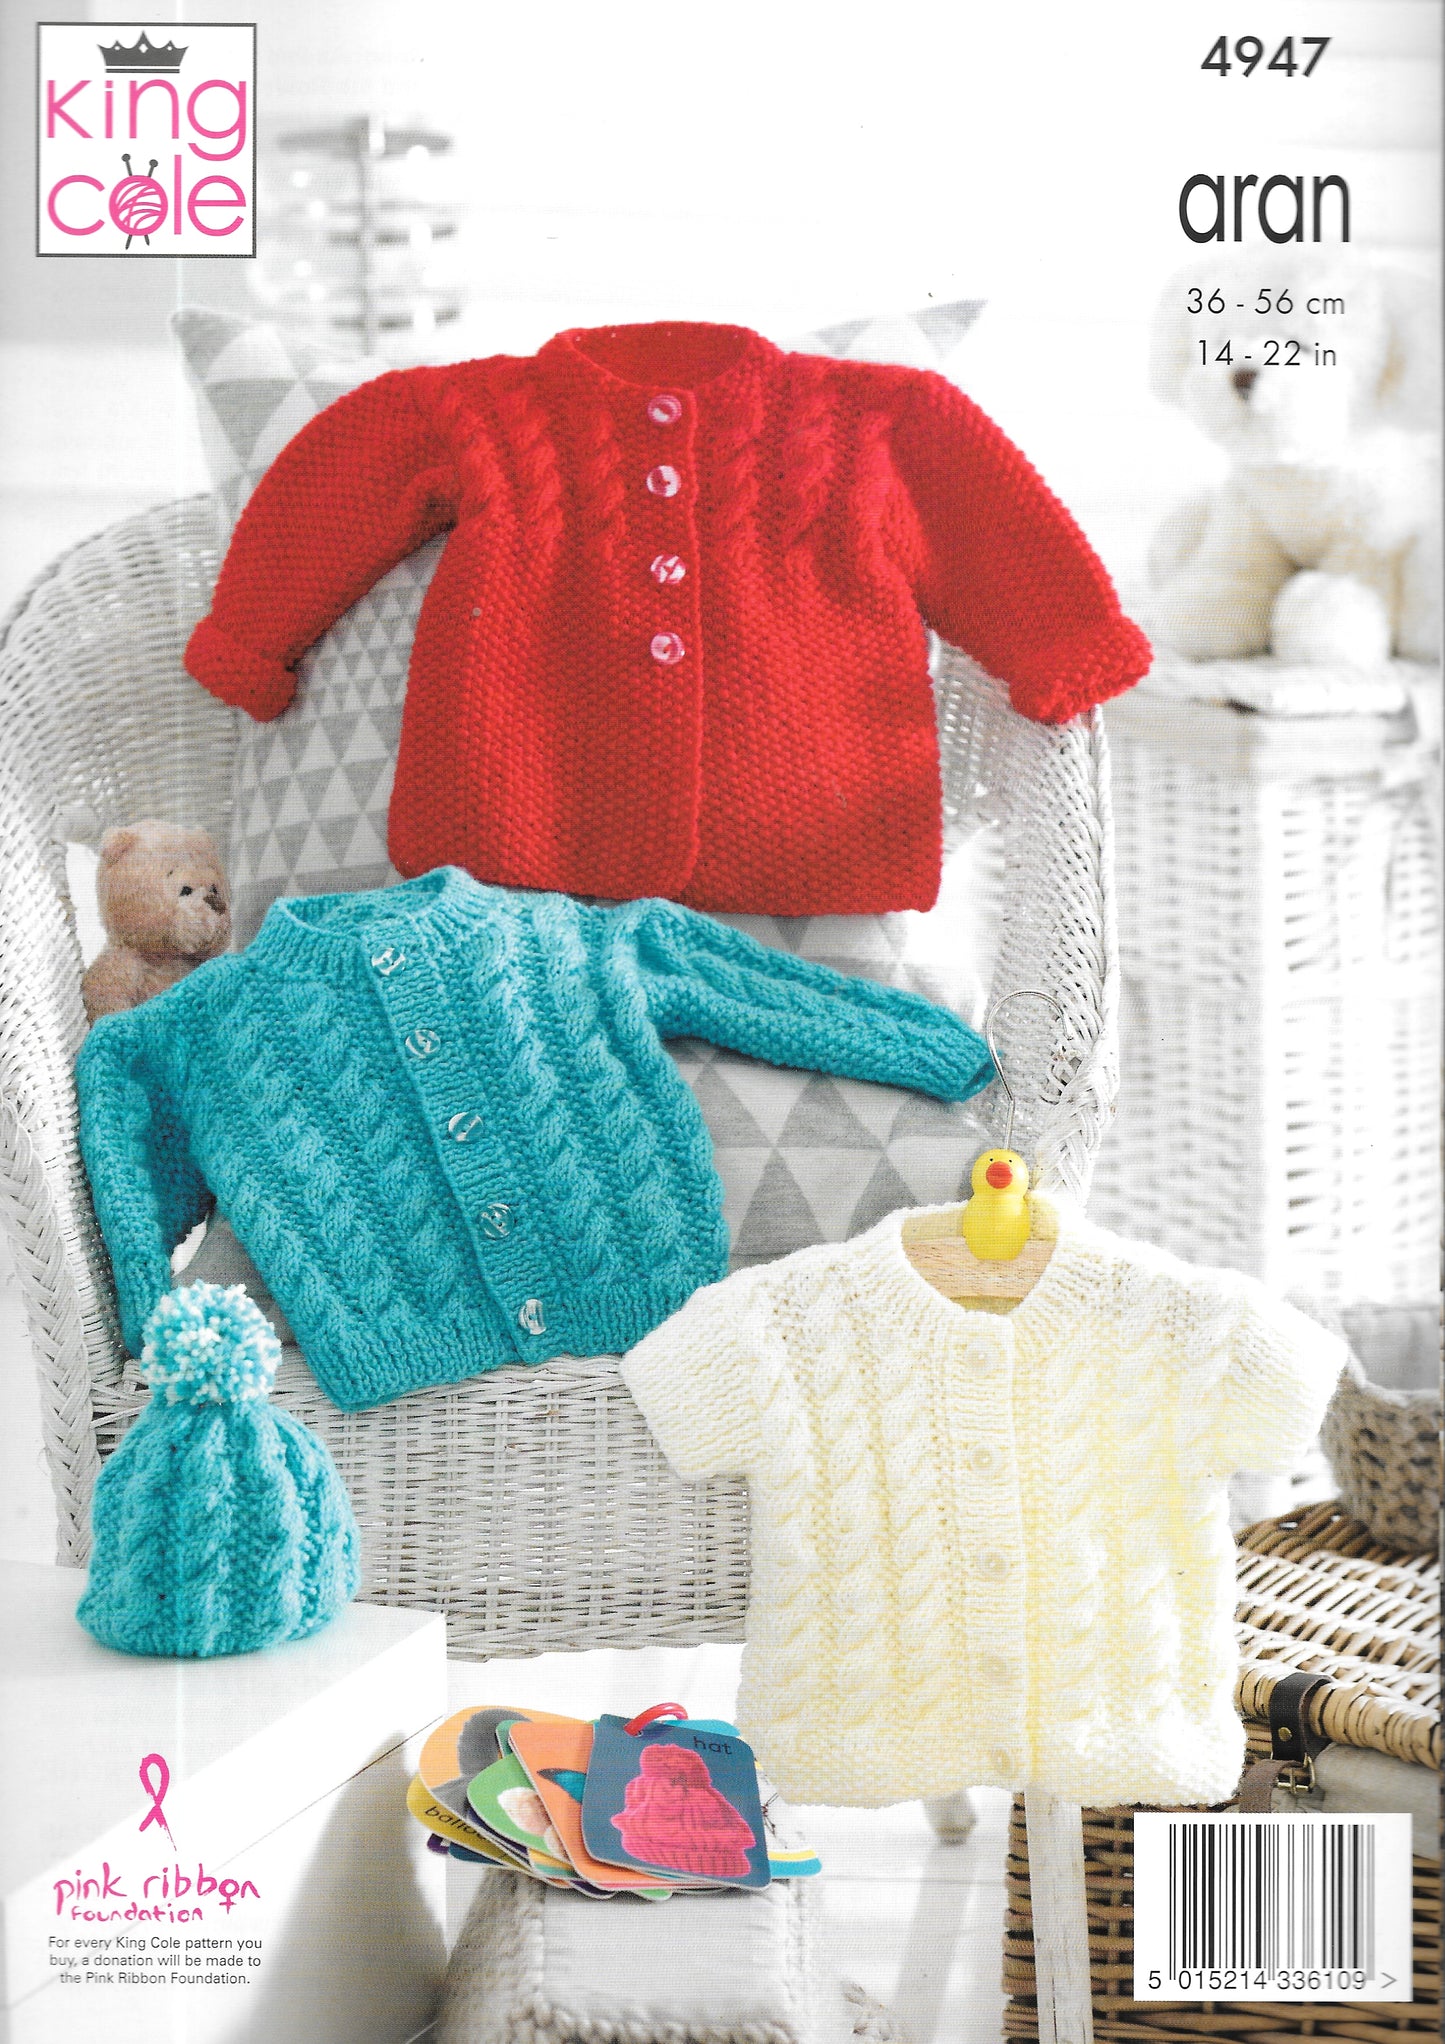 4947 King Cole knitting pattern. Child's cable cardigans. Aran